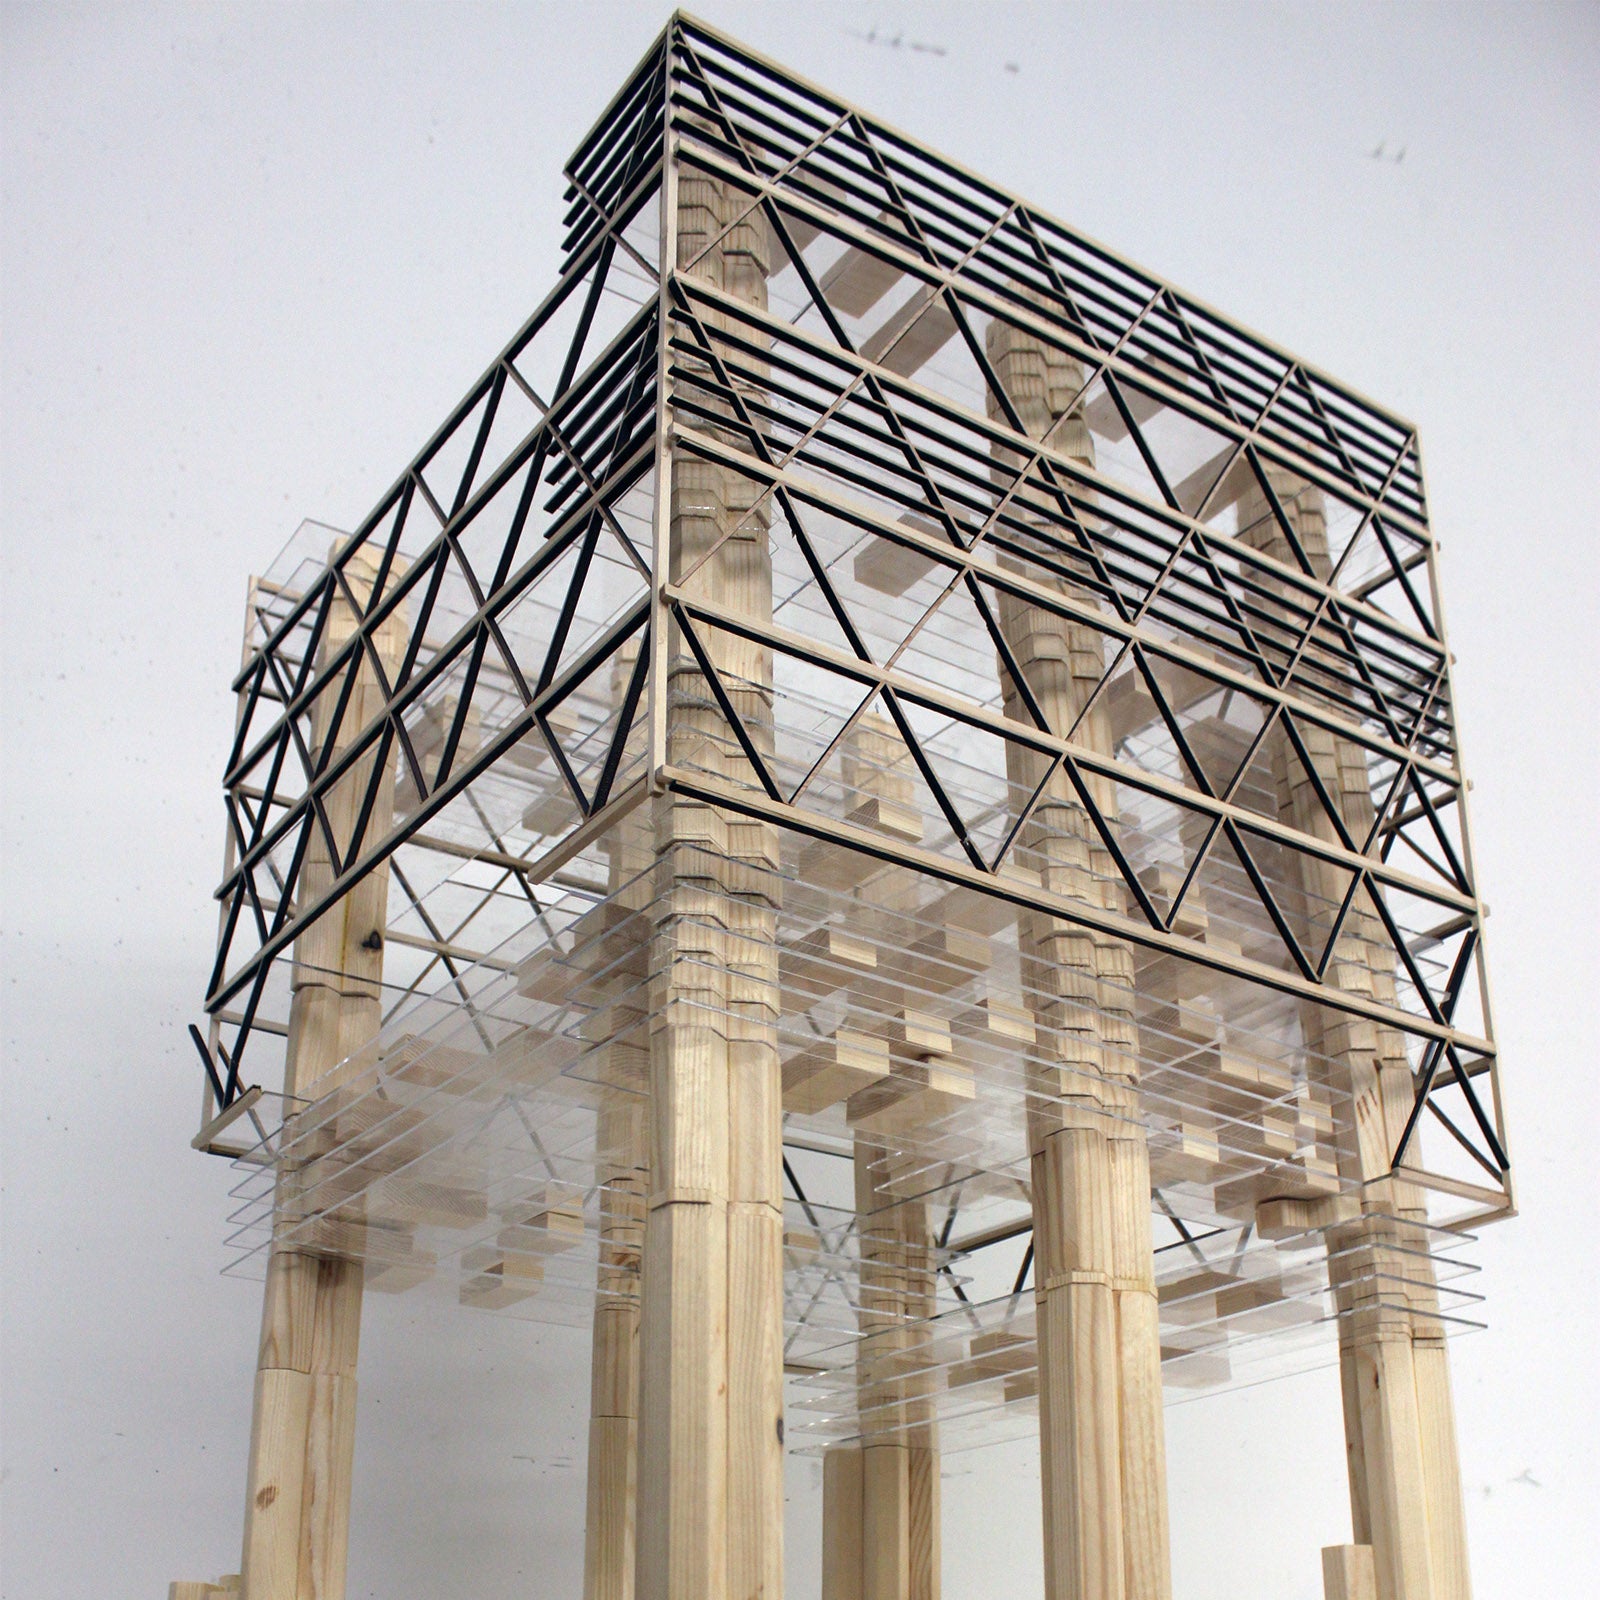 A photograph of the wooden physical model.